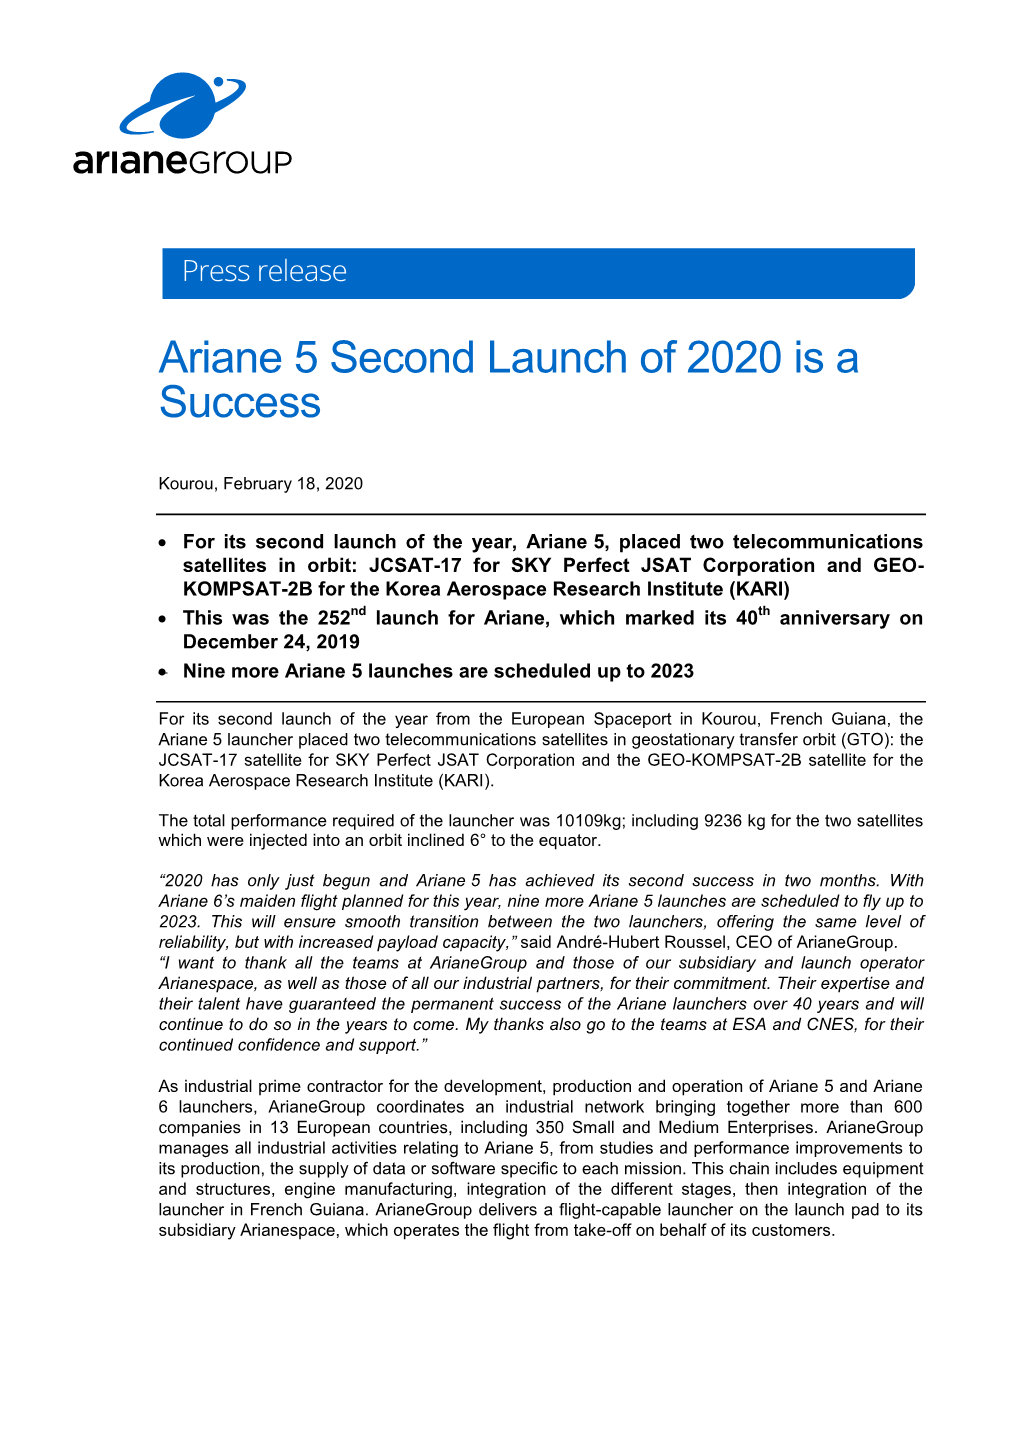 Ariane 5 Second Launch of 2020 Is a Success